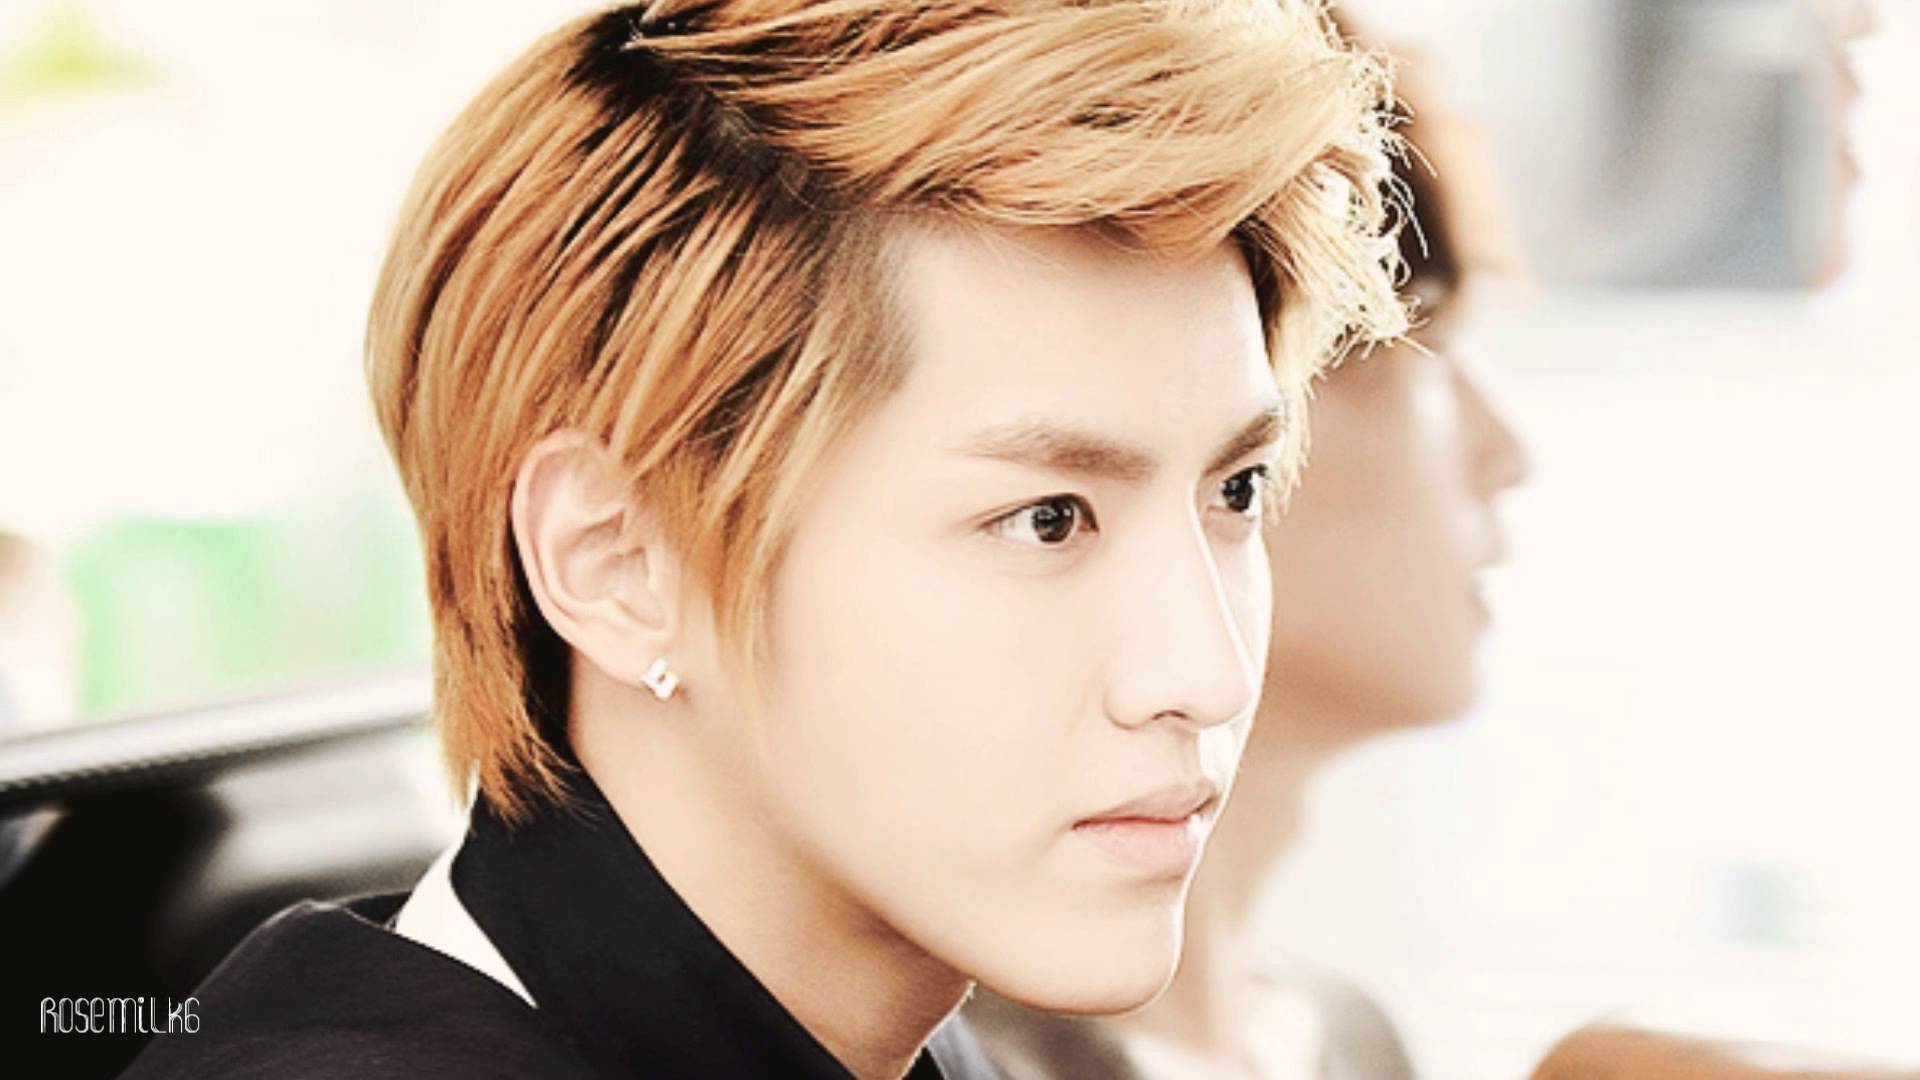 Kris Image HD Wallpaper And Background Photos